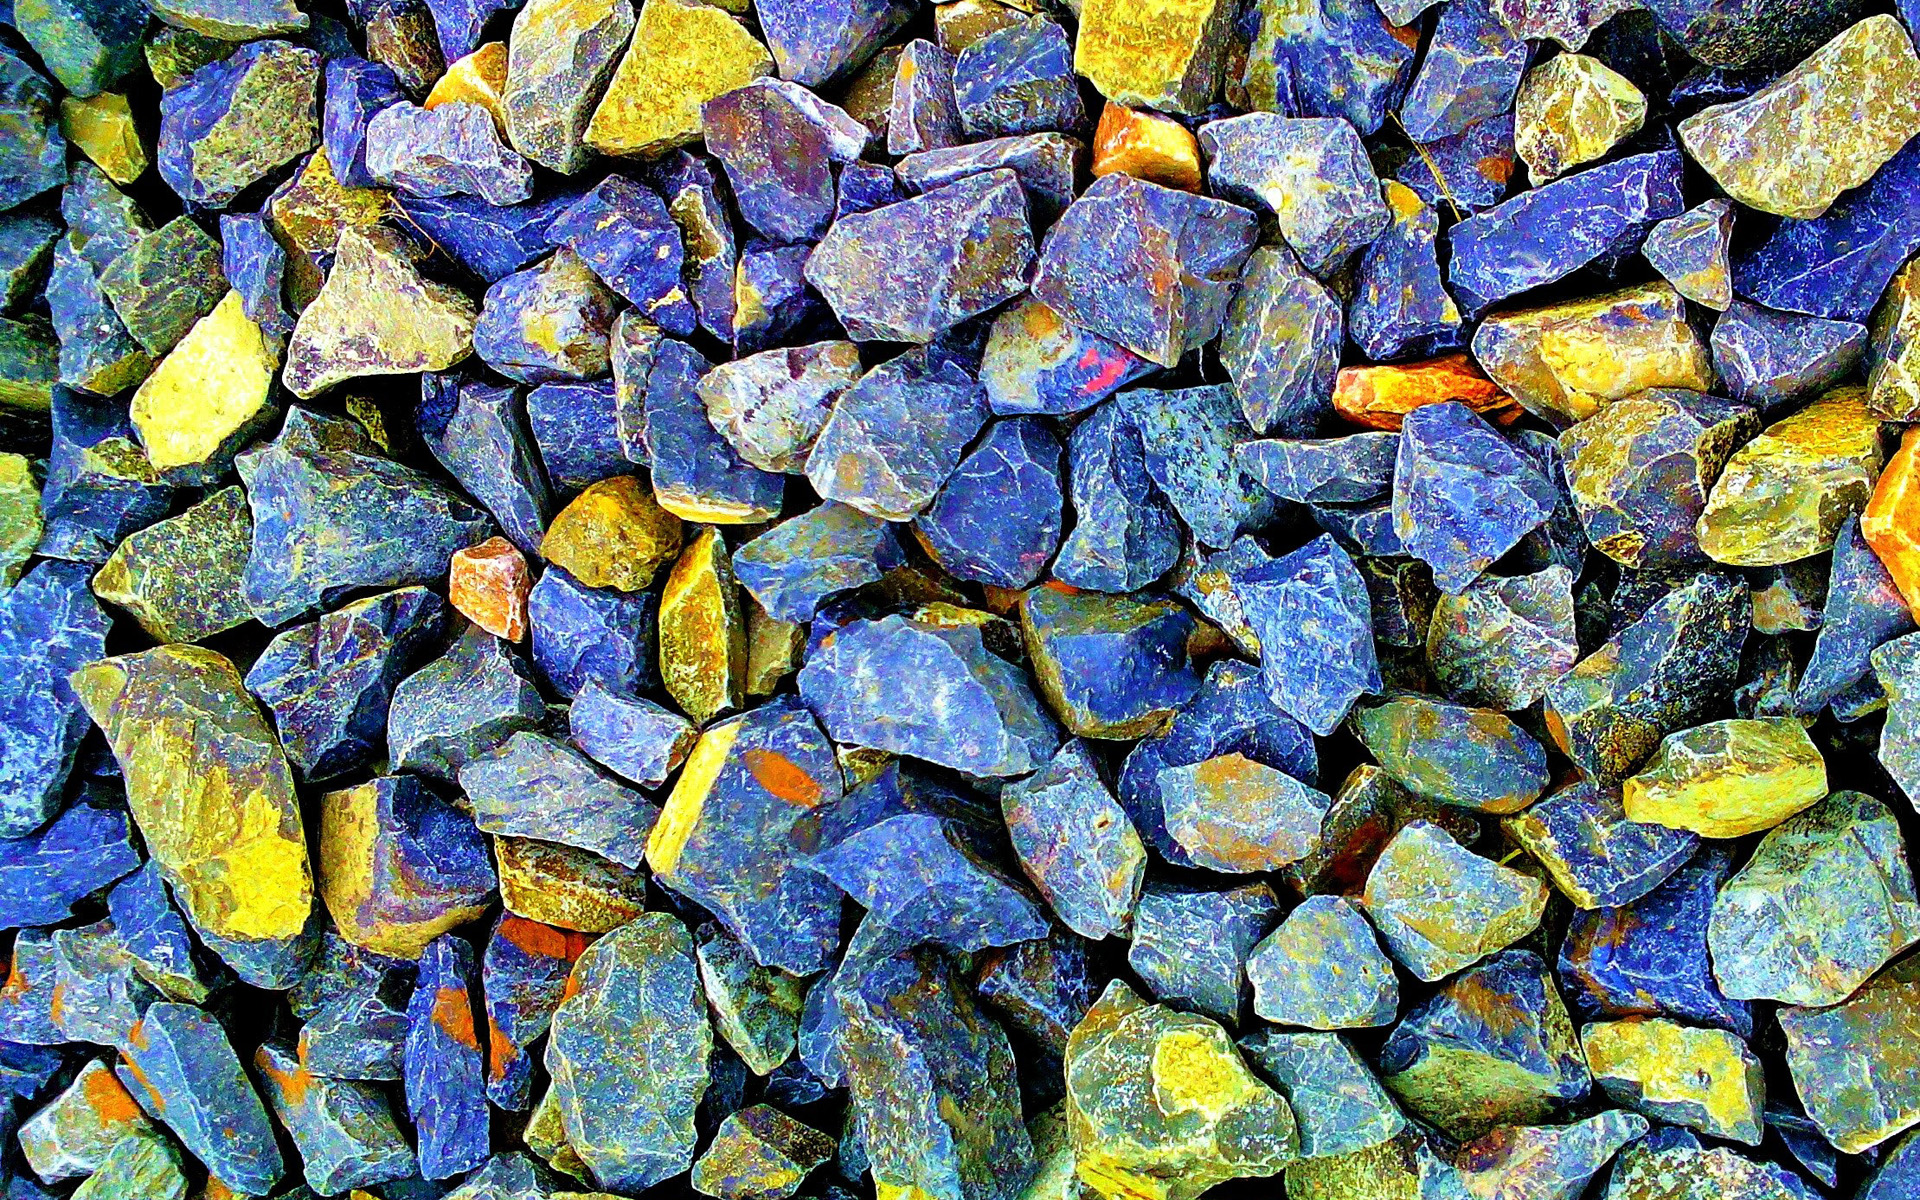 Download wallpaper colorful stone texture, macro, colorful stones, stone background, blue stone background, stone textures for desktop with resolution 1920x1200. High Quality HD picture wallpaper